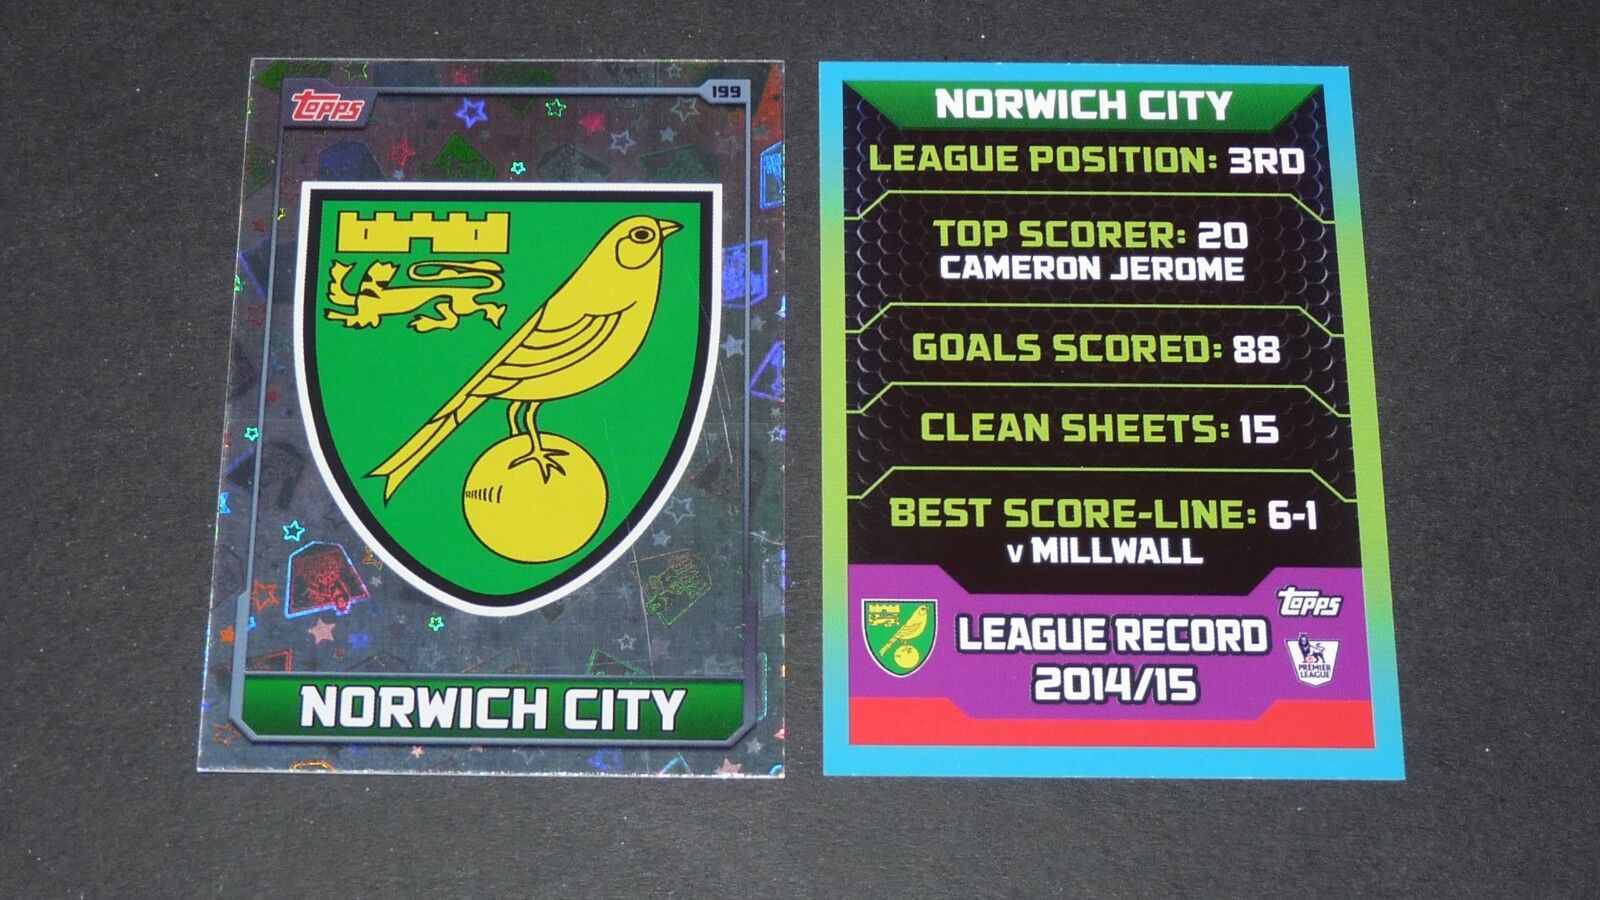 NORWICH CITY CANARIES TOPPS MATCH ATTAX PANINI PREMIER LEAGUE BADGE 2015-2016